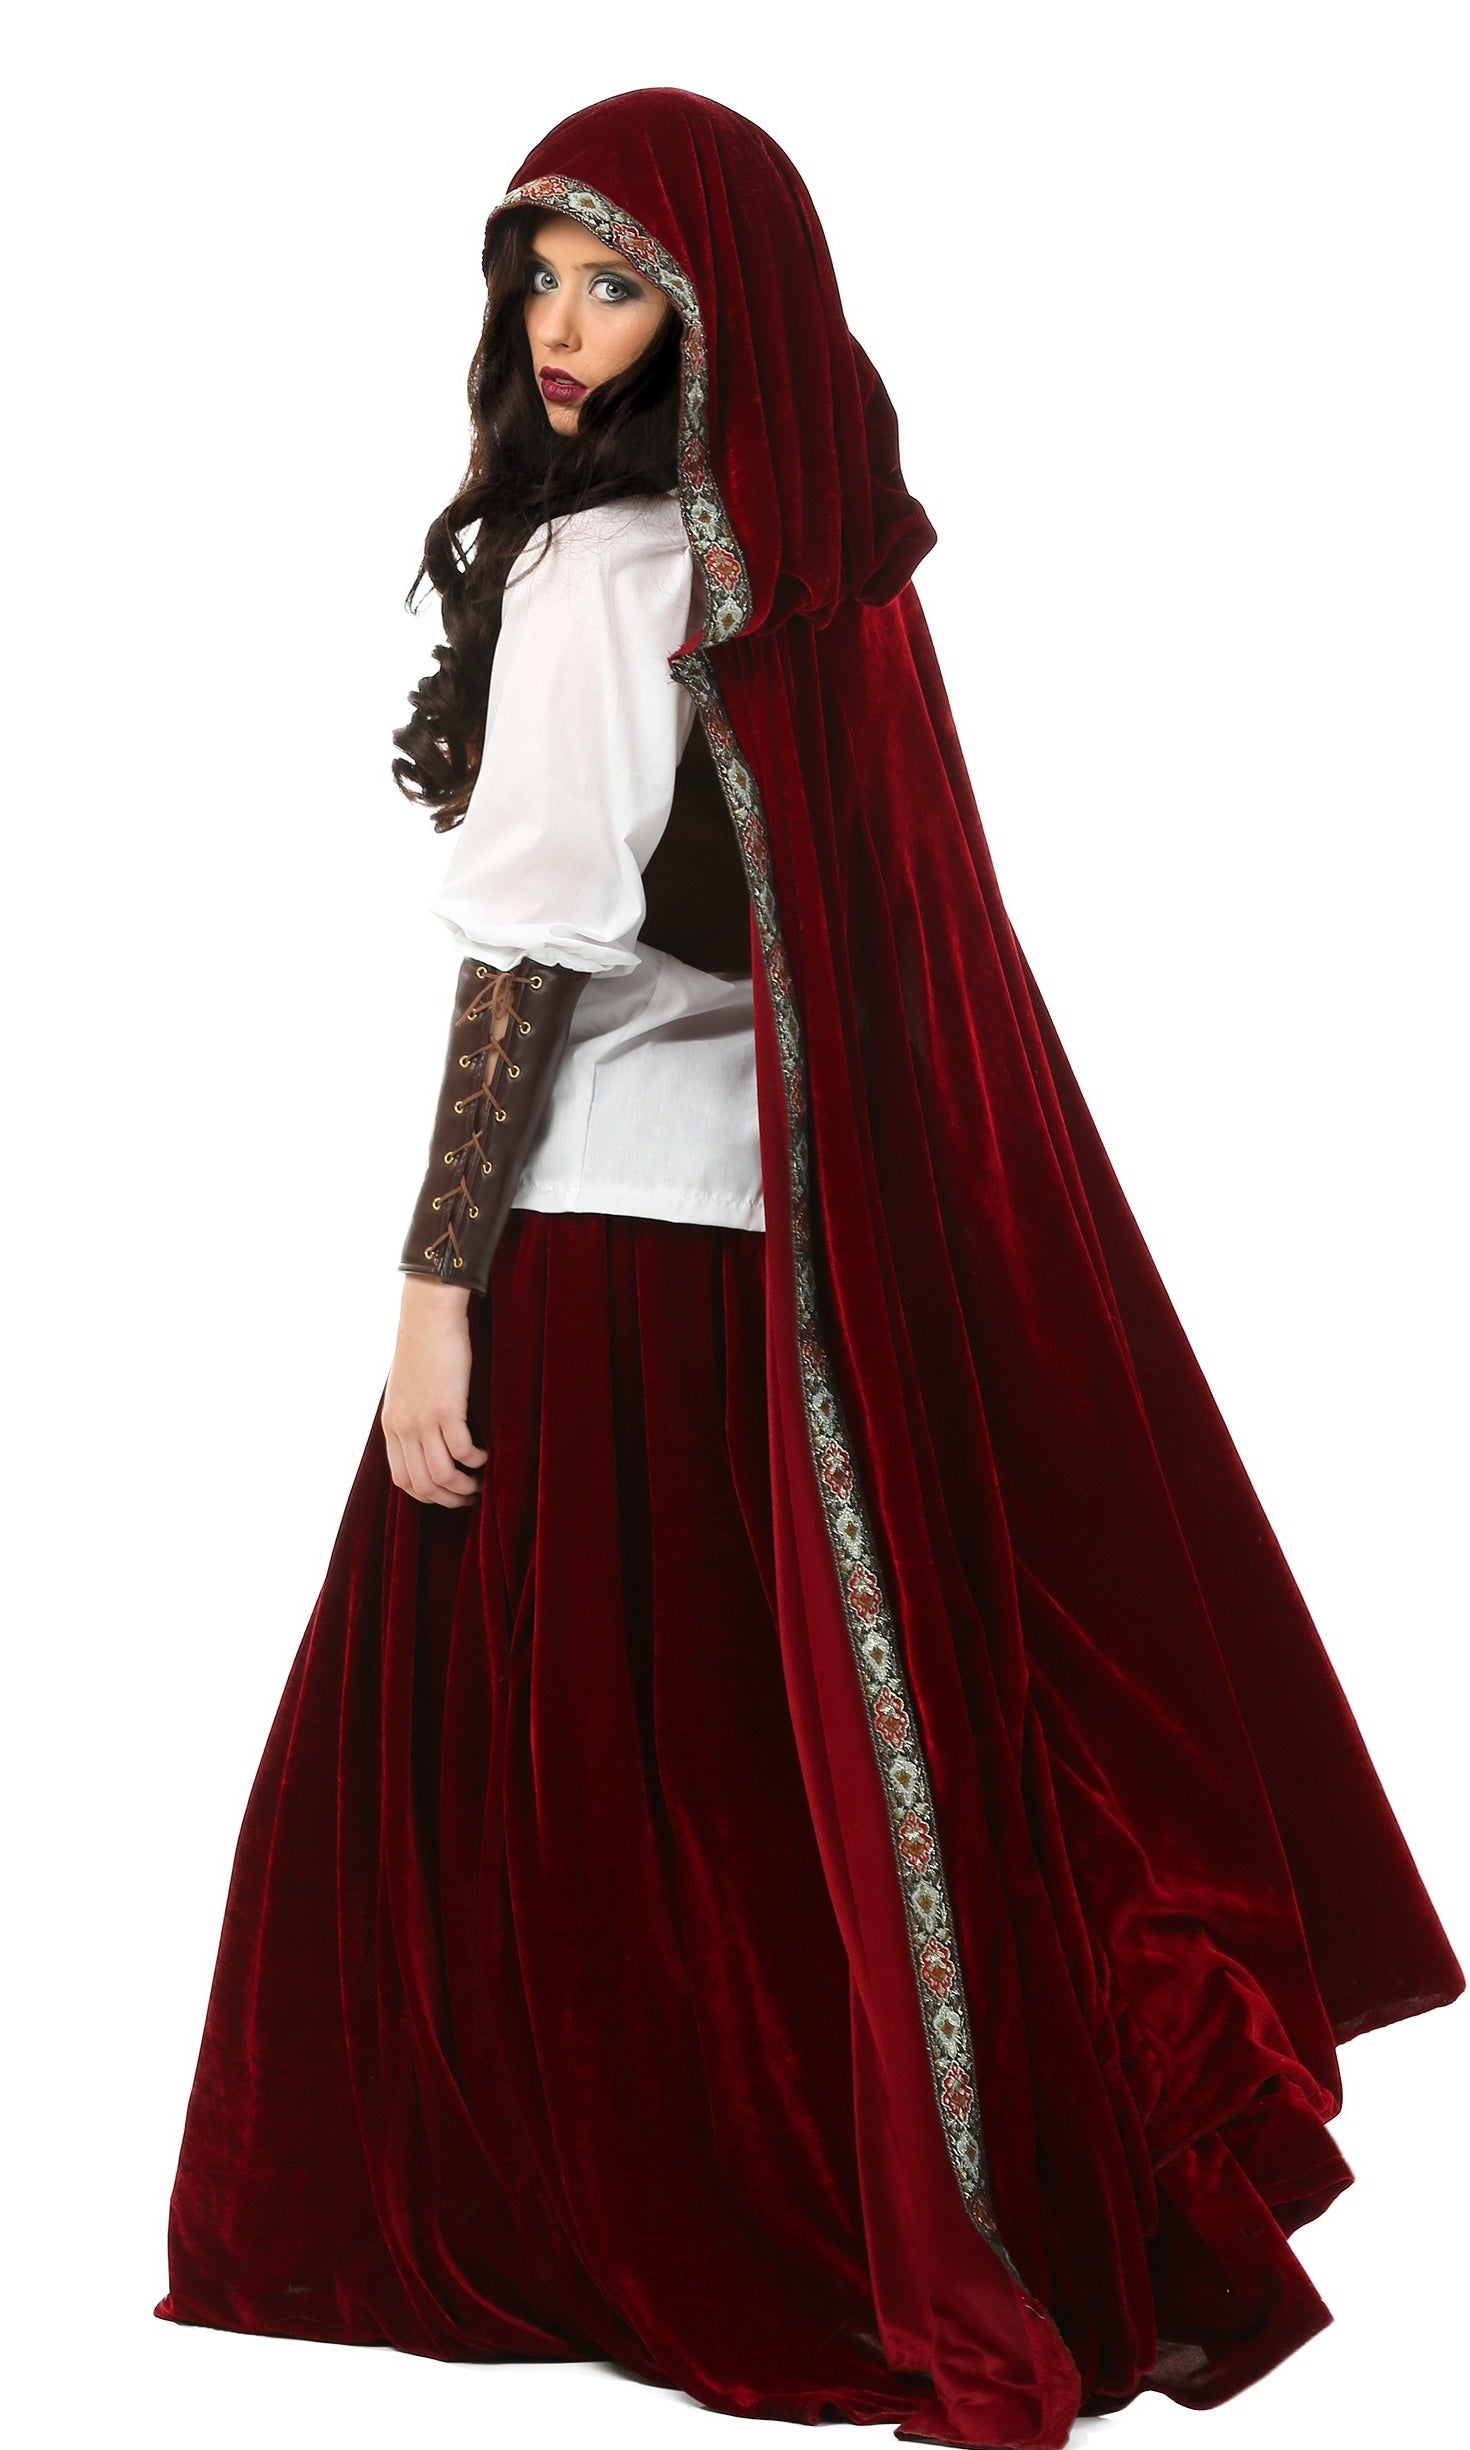 Side view of Red Riding Hood deluxe costume with shirt, vest and hooded cape